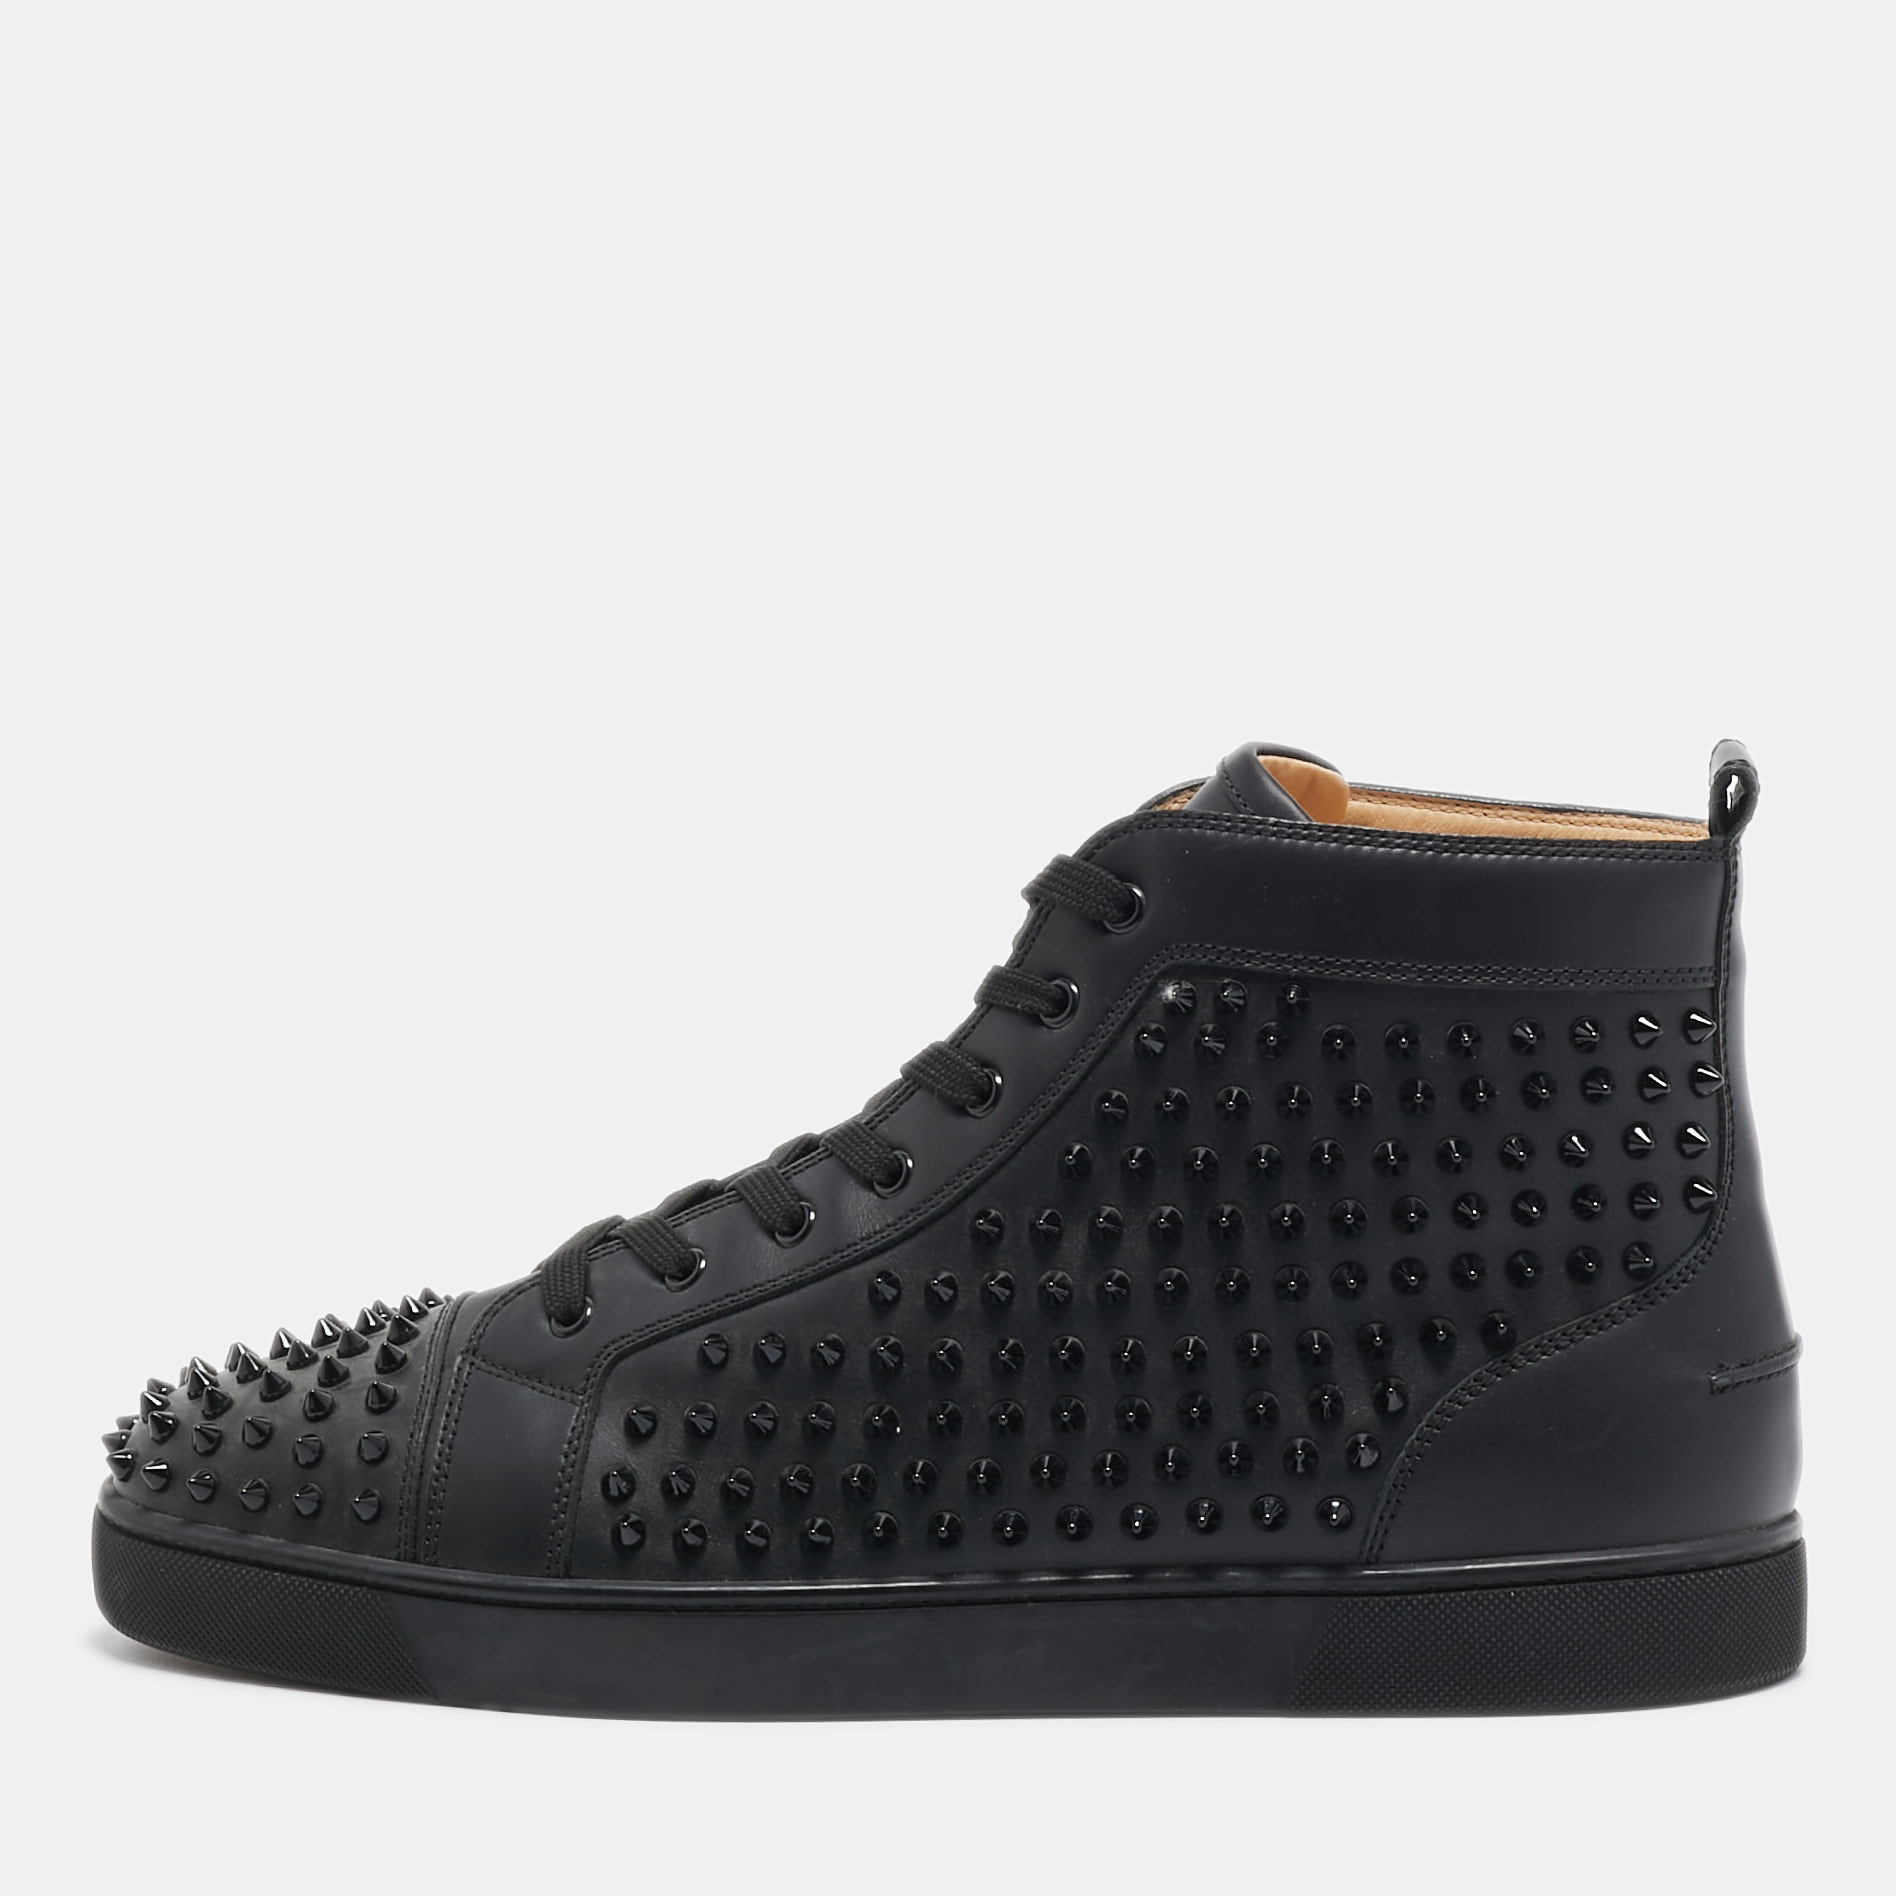 Pre-owned Christian Louboutin Louis Black Leather Spike Cap Toe High Top Sneakers Size 48